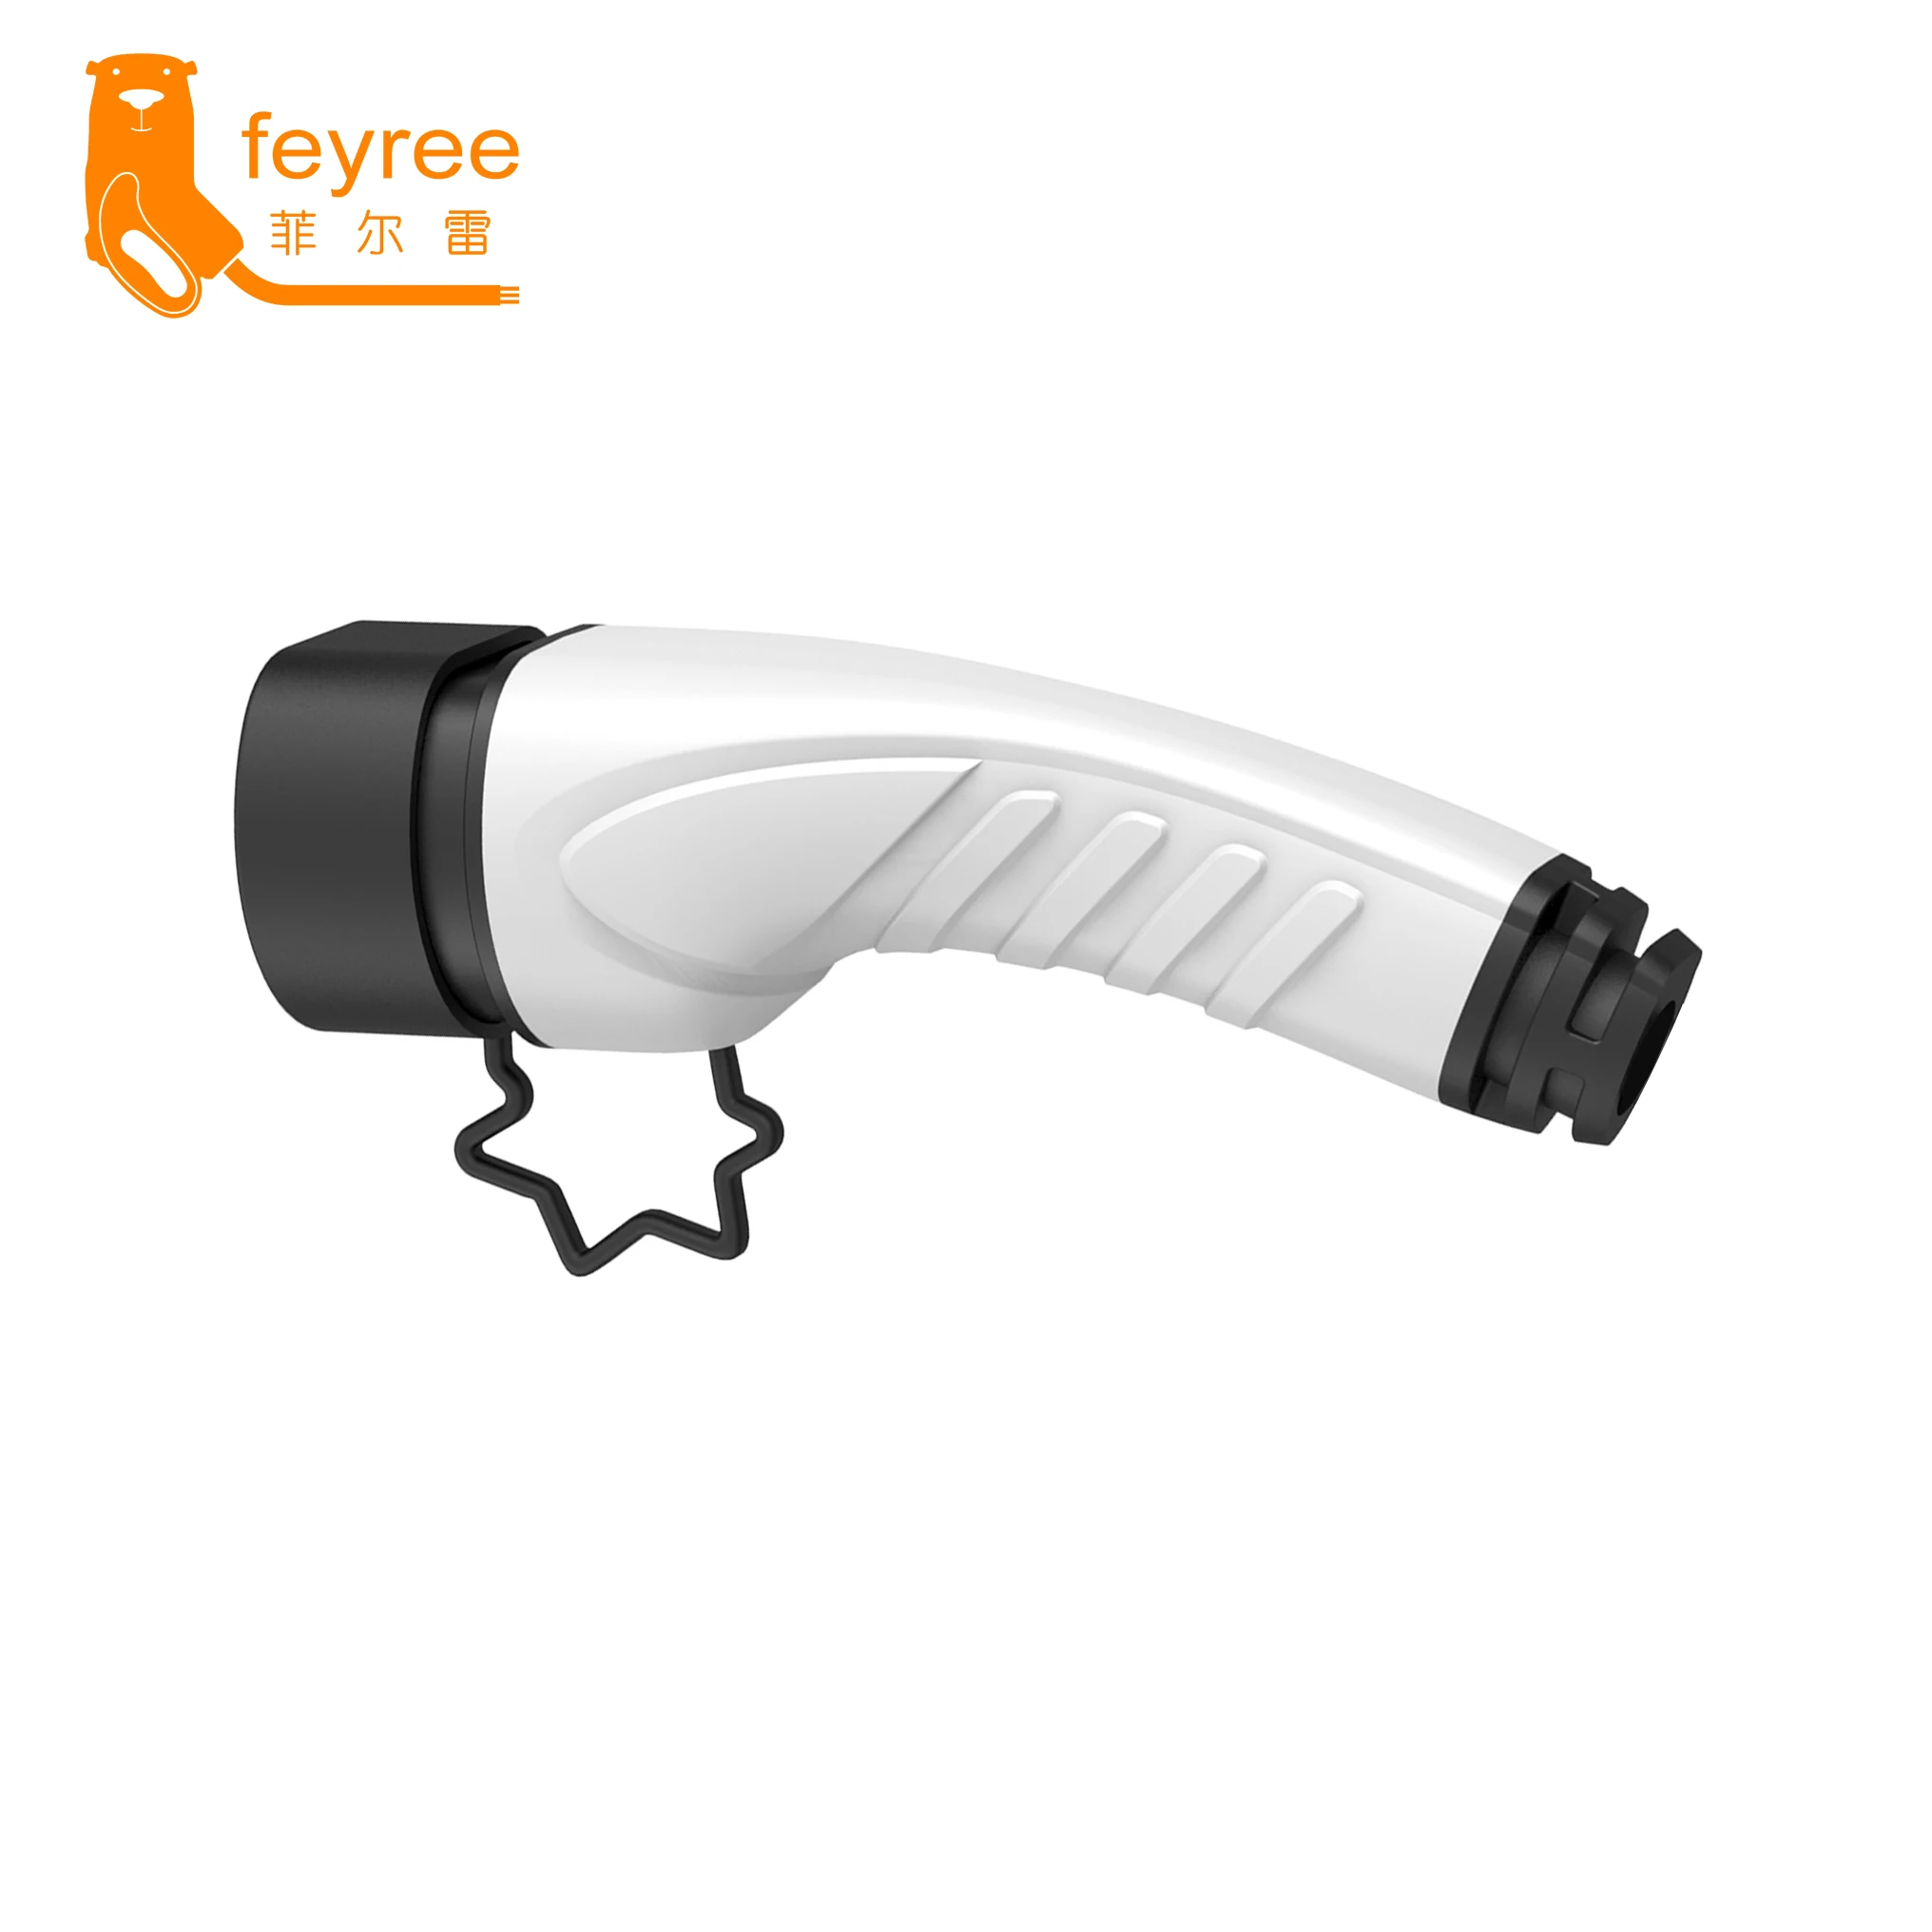 feyree ev charger plug adapter type 2 evse charger female iec 62196 convertor 16a 32a for electric car vehicle charging station free global shipping